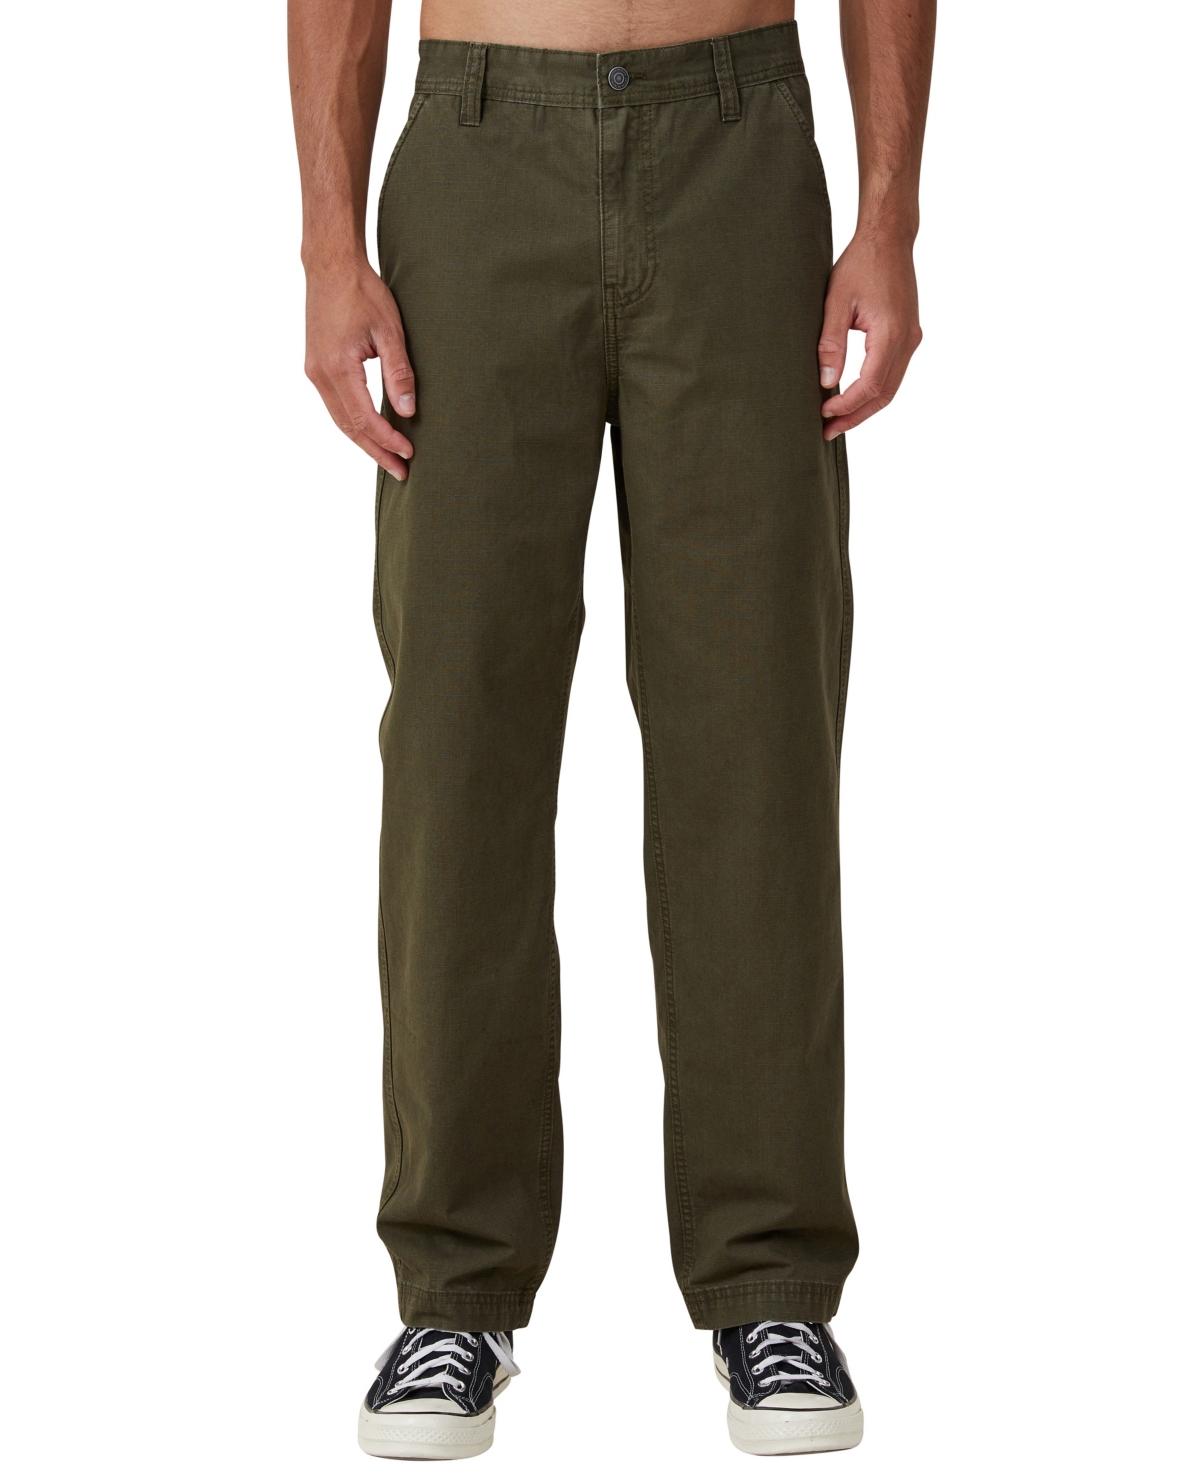 Men's Loose Fit Pants - Washed Jungle Ripstop